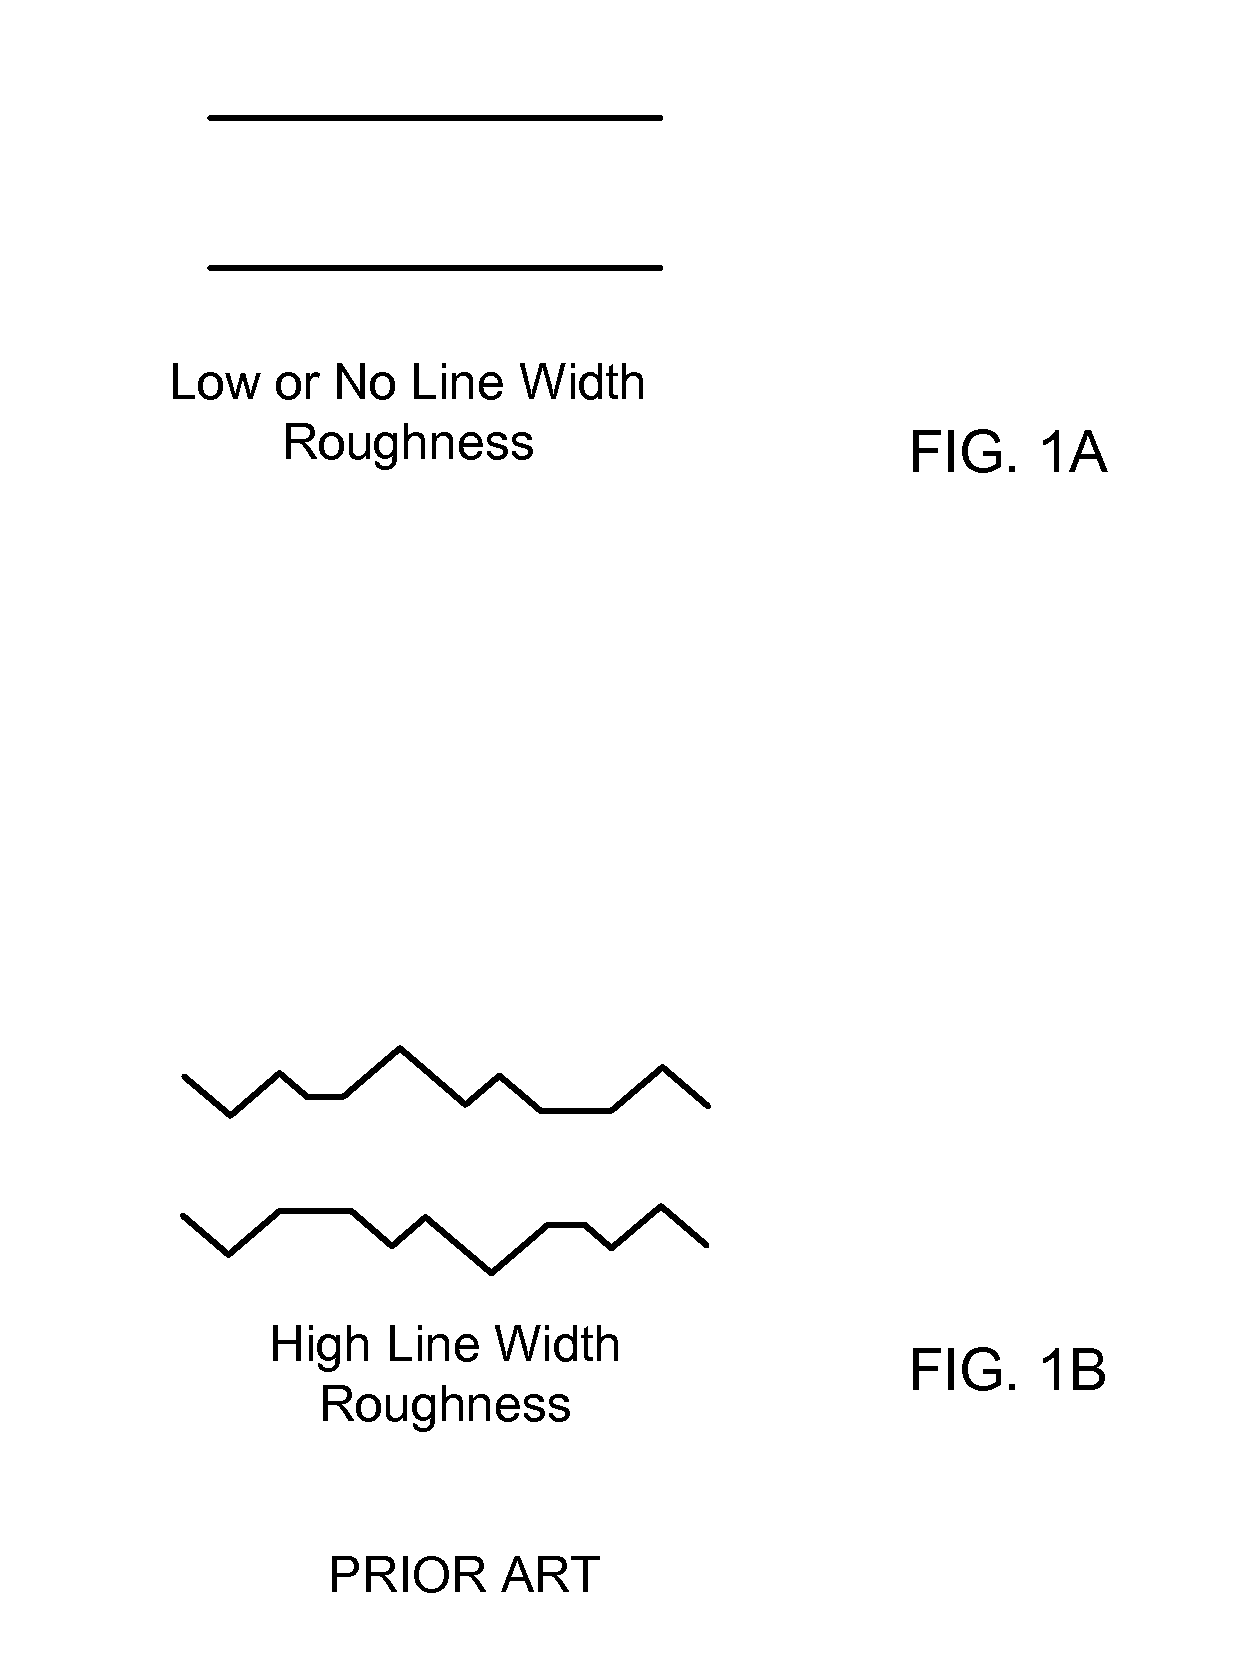 Line width roughness improvement with noble gas plasma